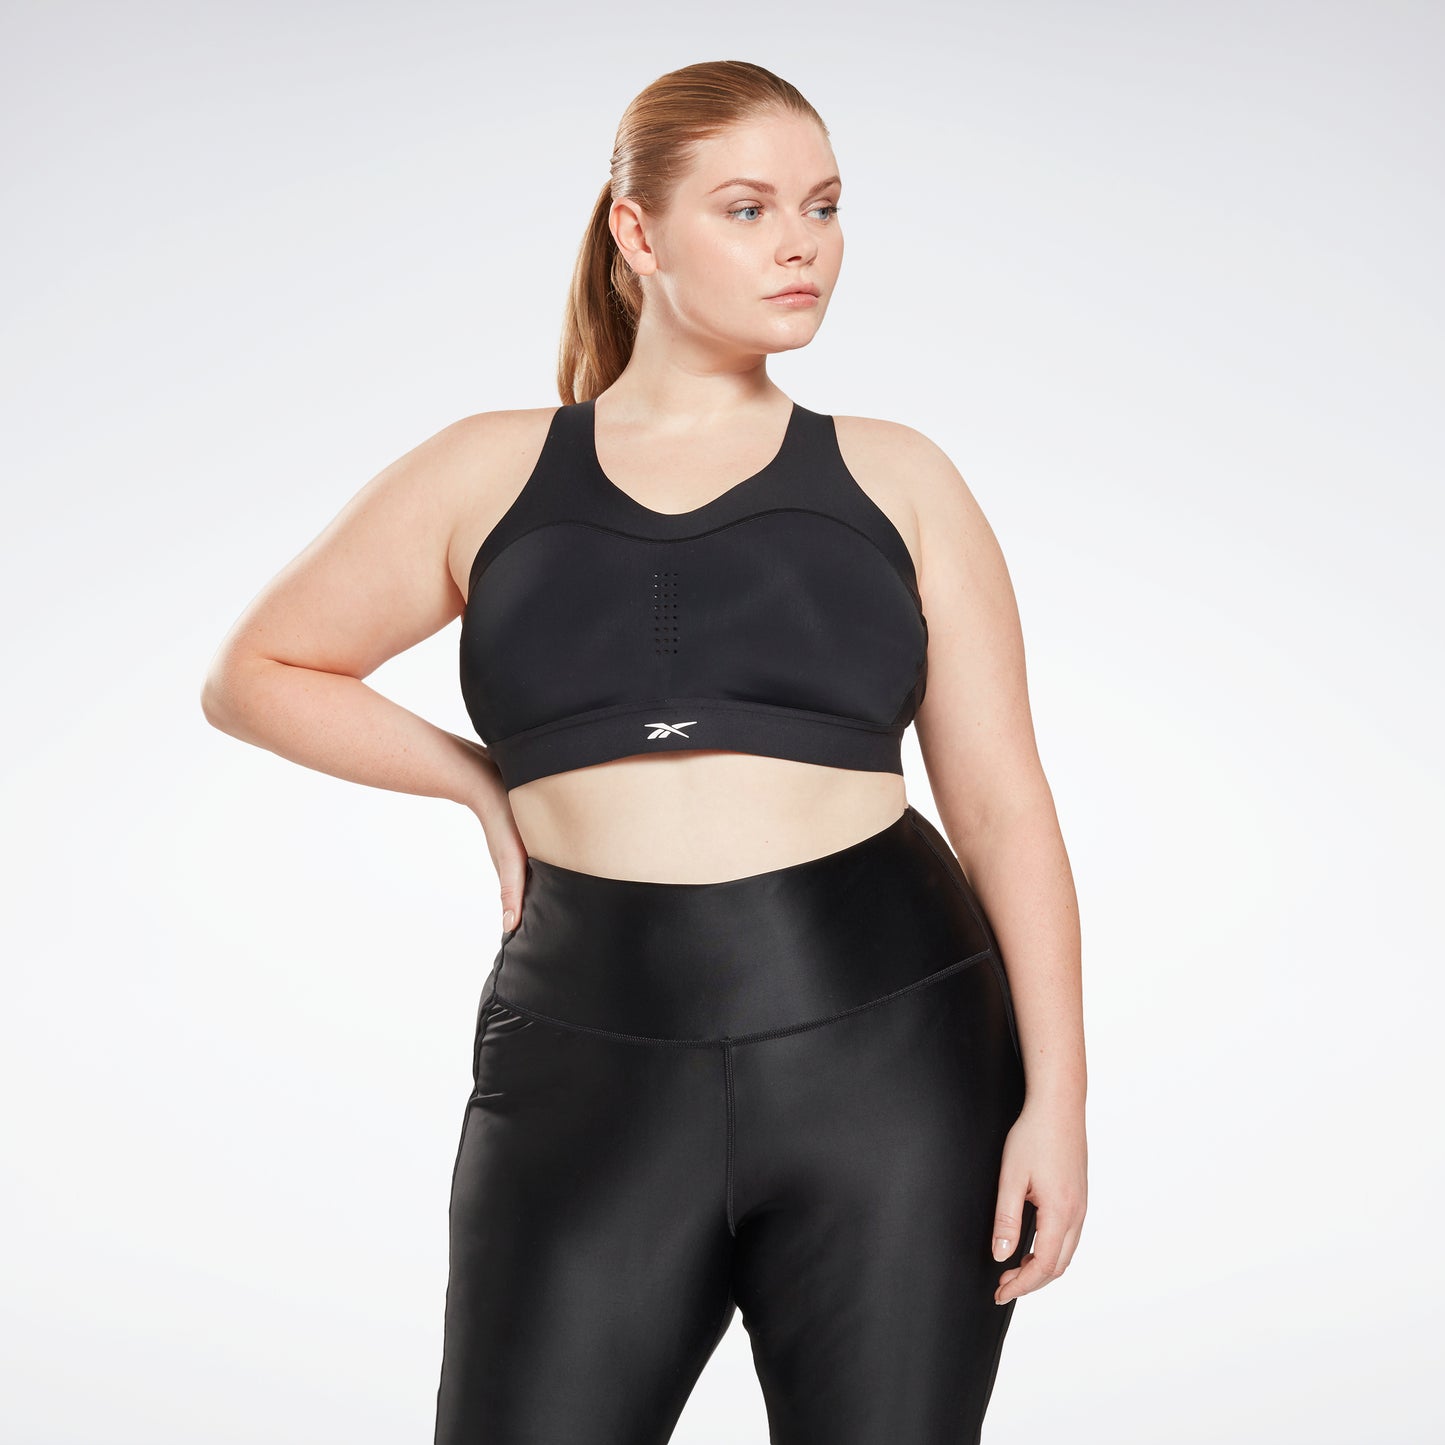 Reebok PureMove Sports Bra Review: Finally, a Bra That Holds up and Adapts  to My Intense Workouts